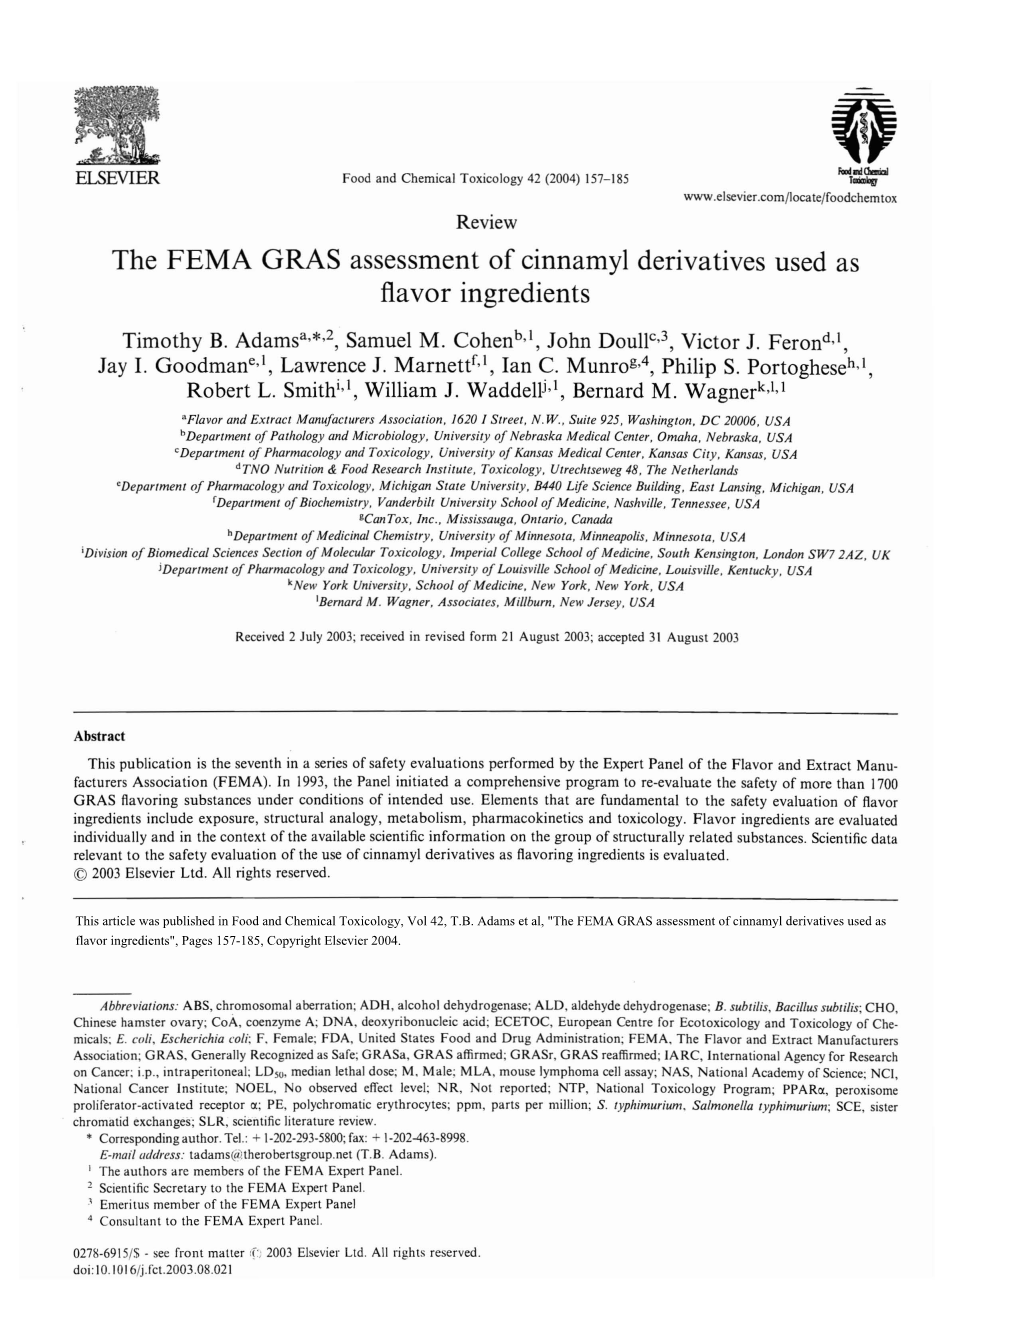 The FEMA GRAS Assessment of Cinnamyl Derivatives Used As Flavor Ingredients